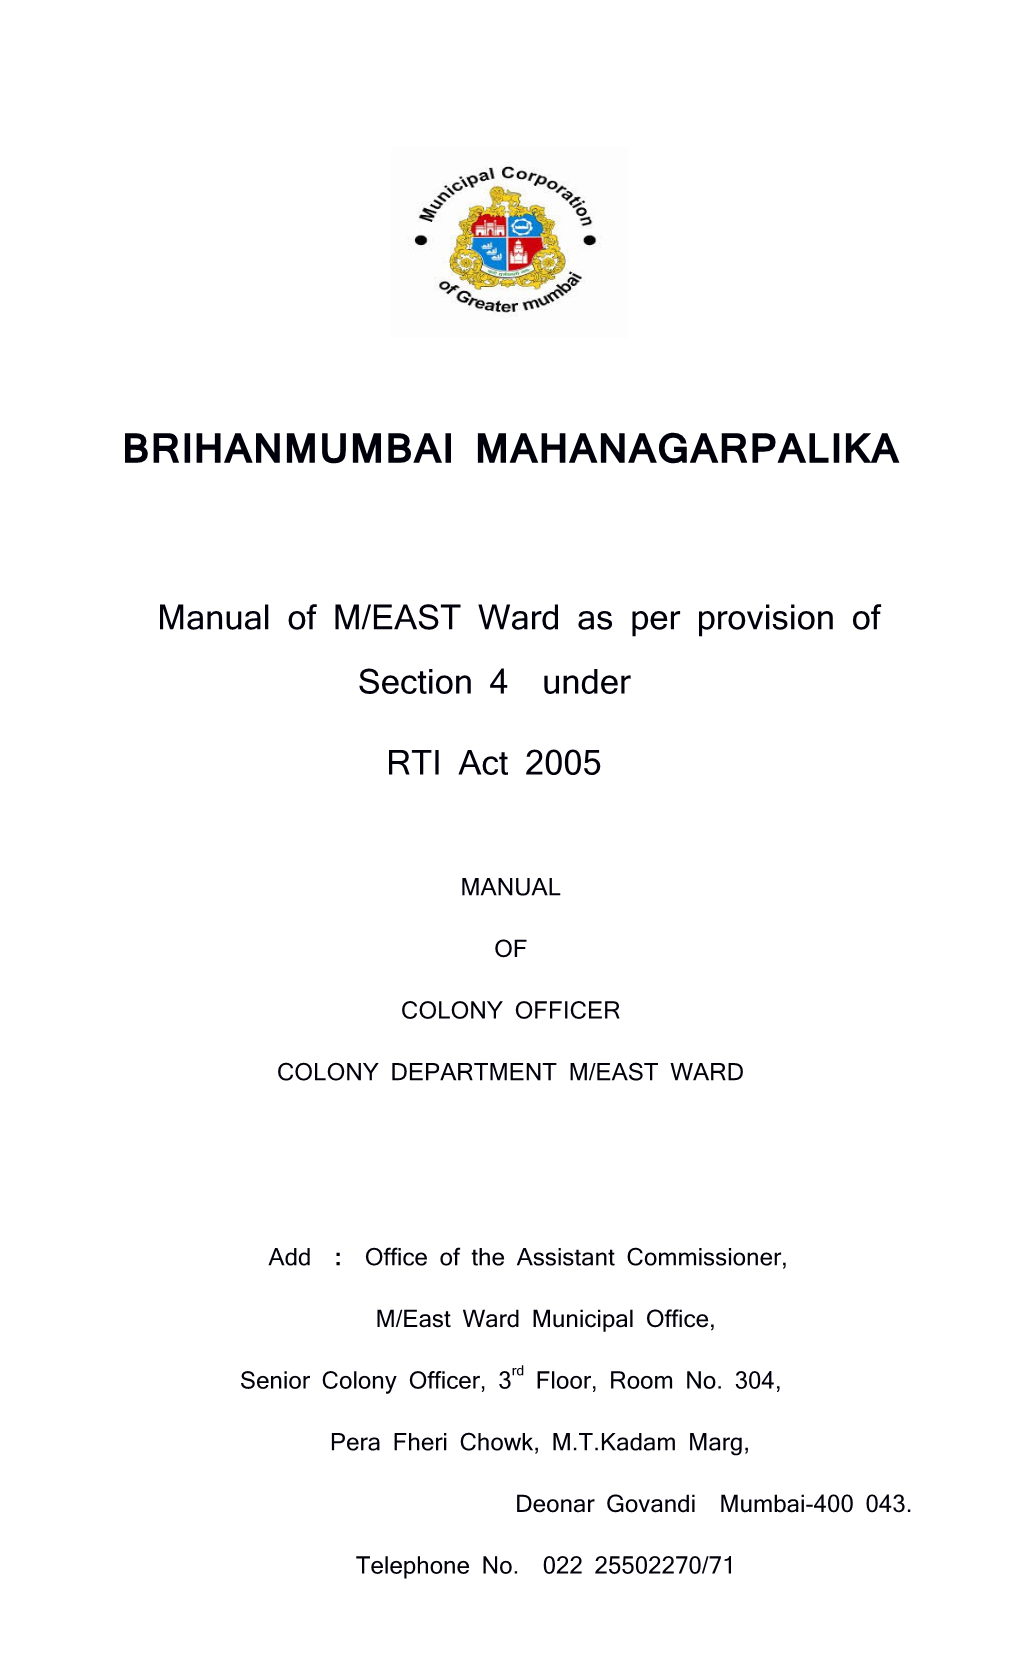 Manual of M/EAST Ward As Per Provision of Section 4 Under RTI Act